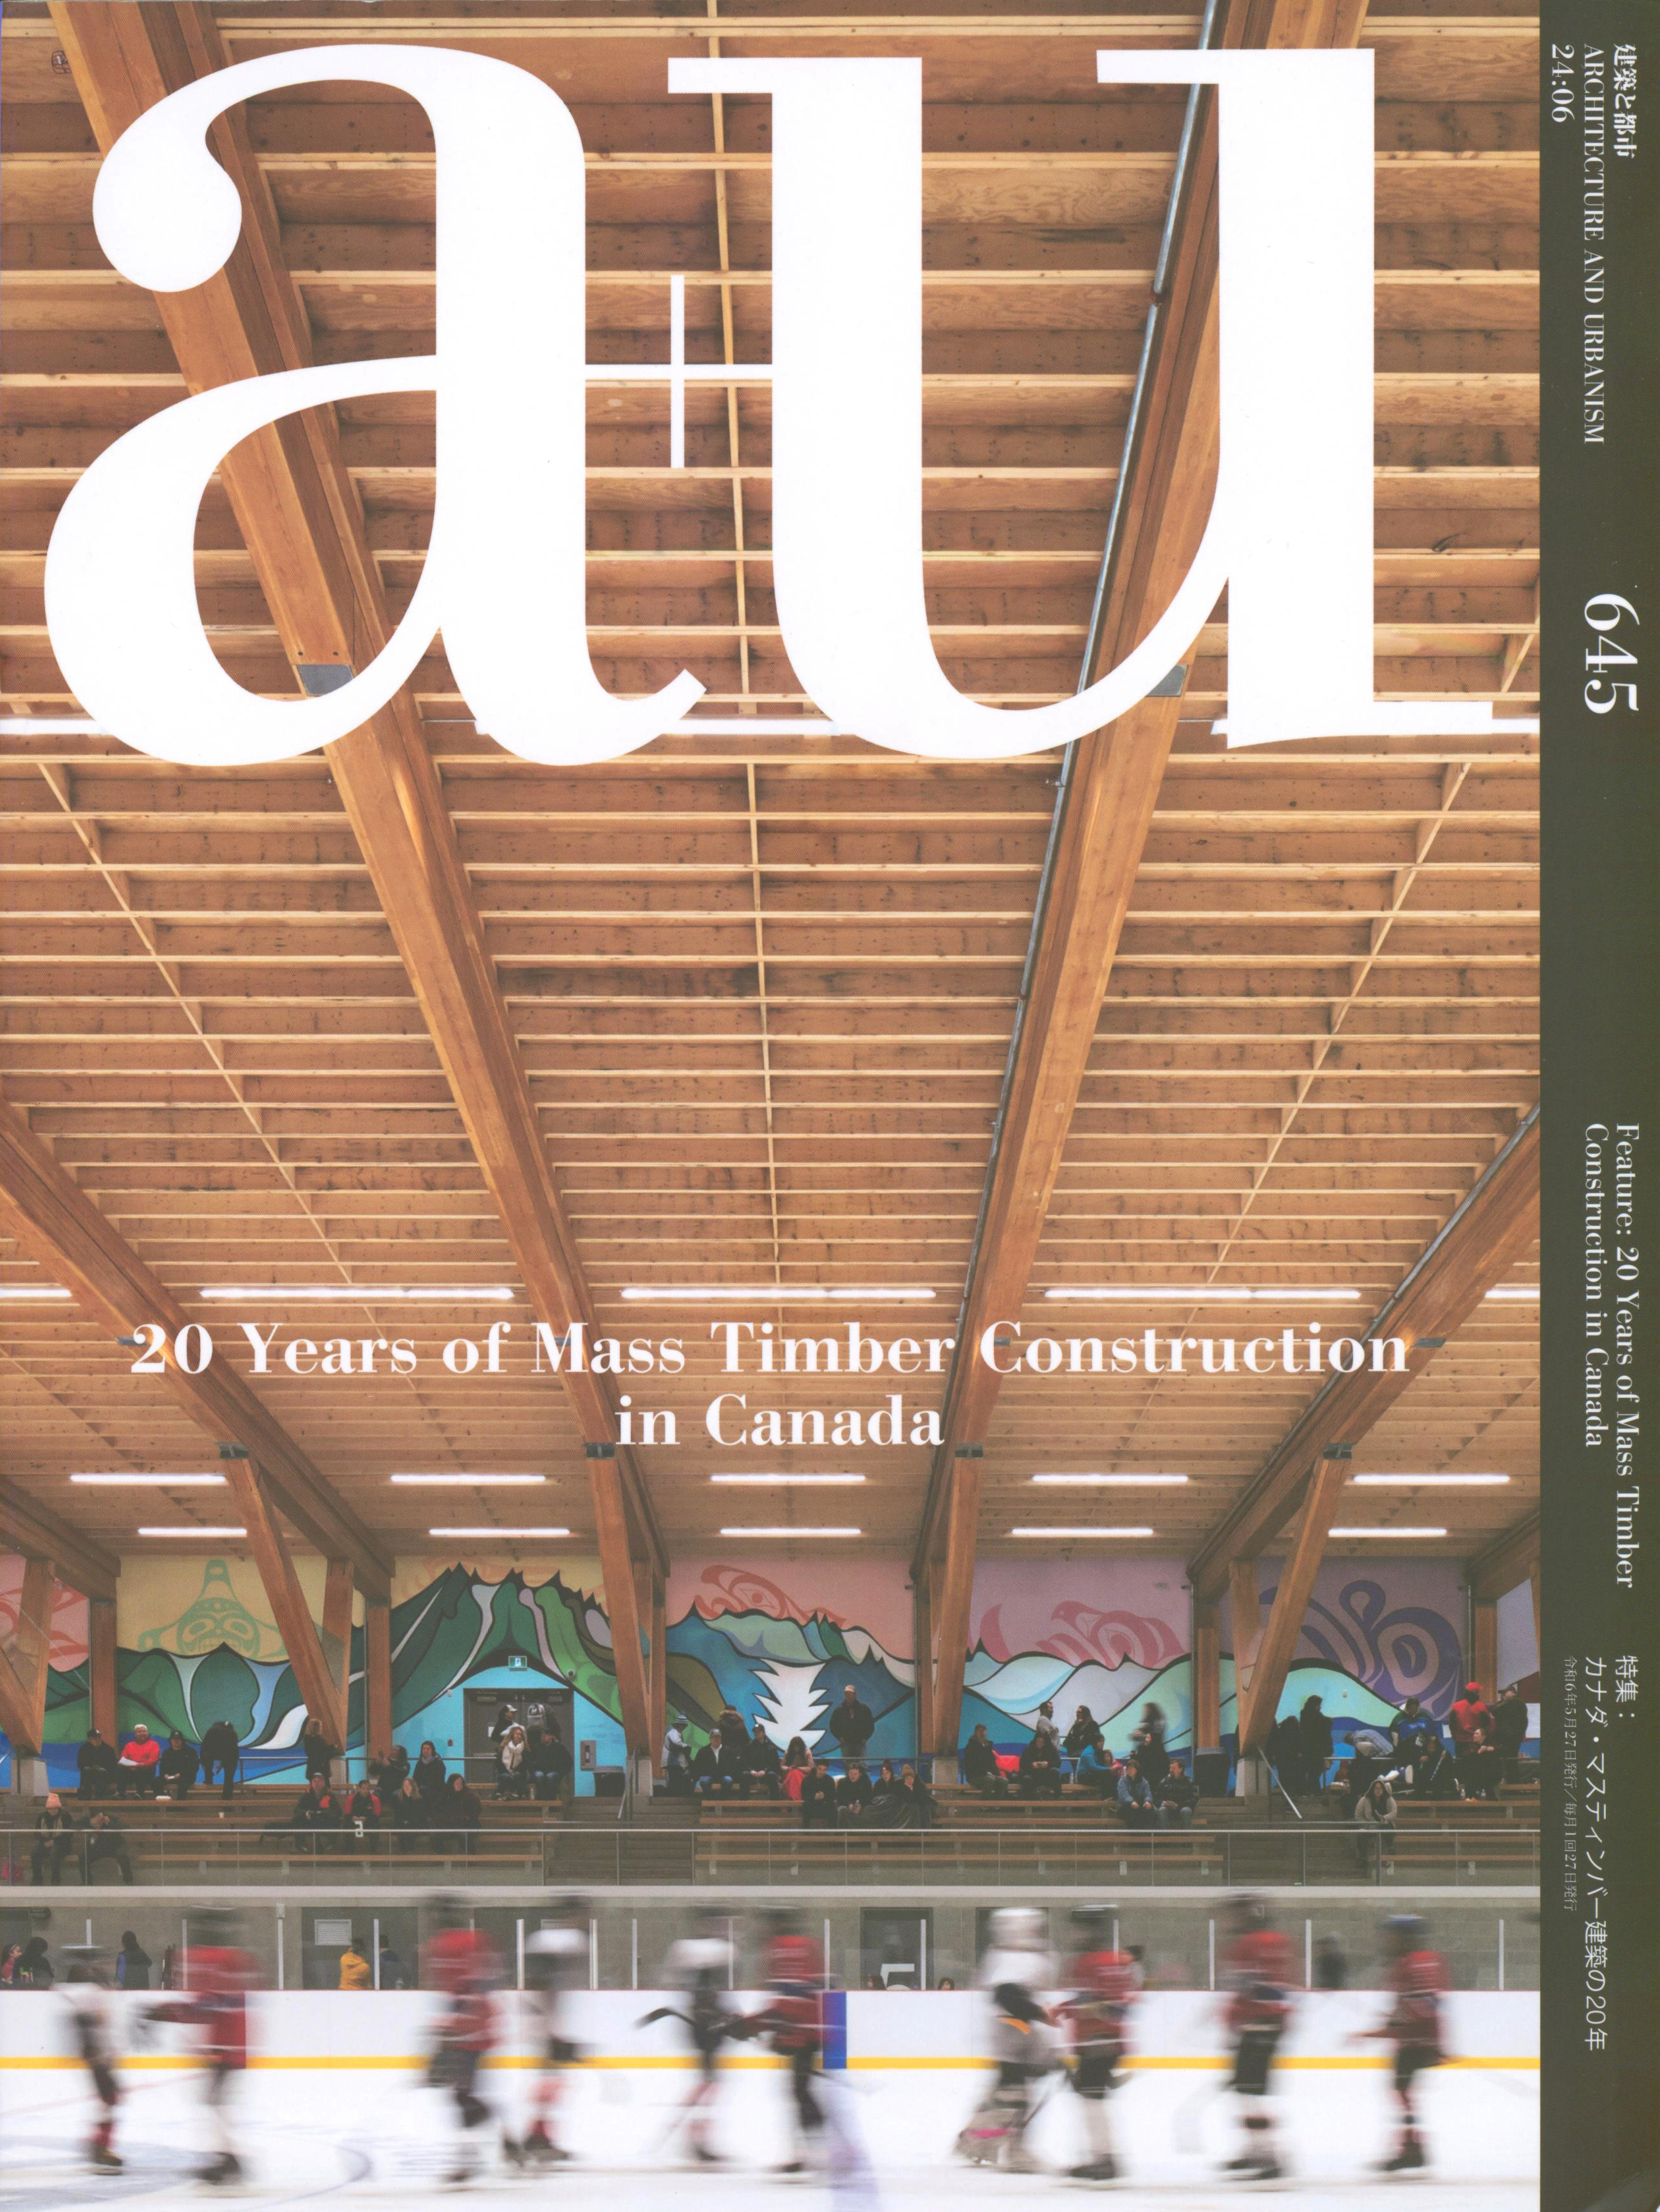 a+u 645 24:06 20 Years of Mass Timber Constructions in Canada